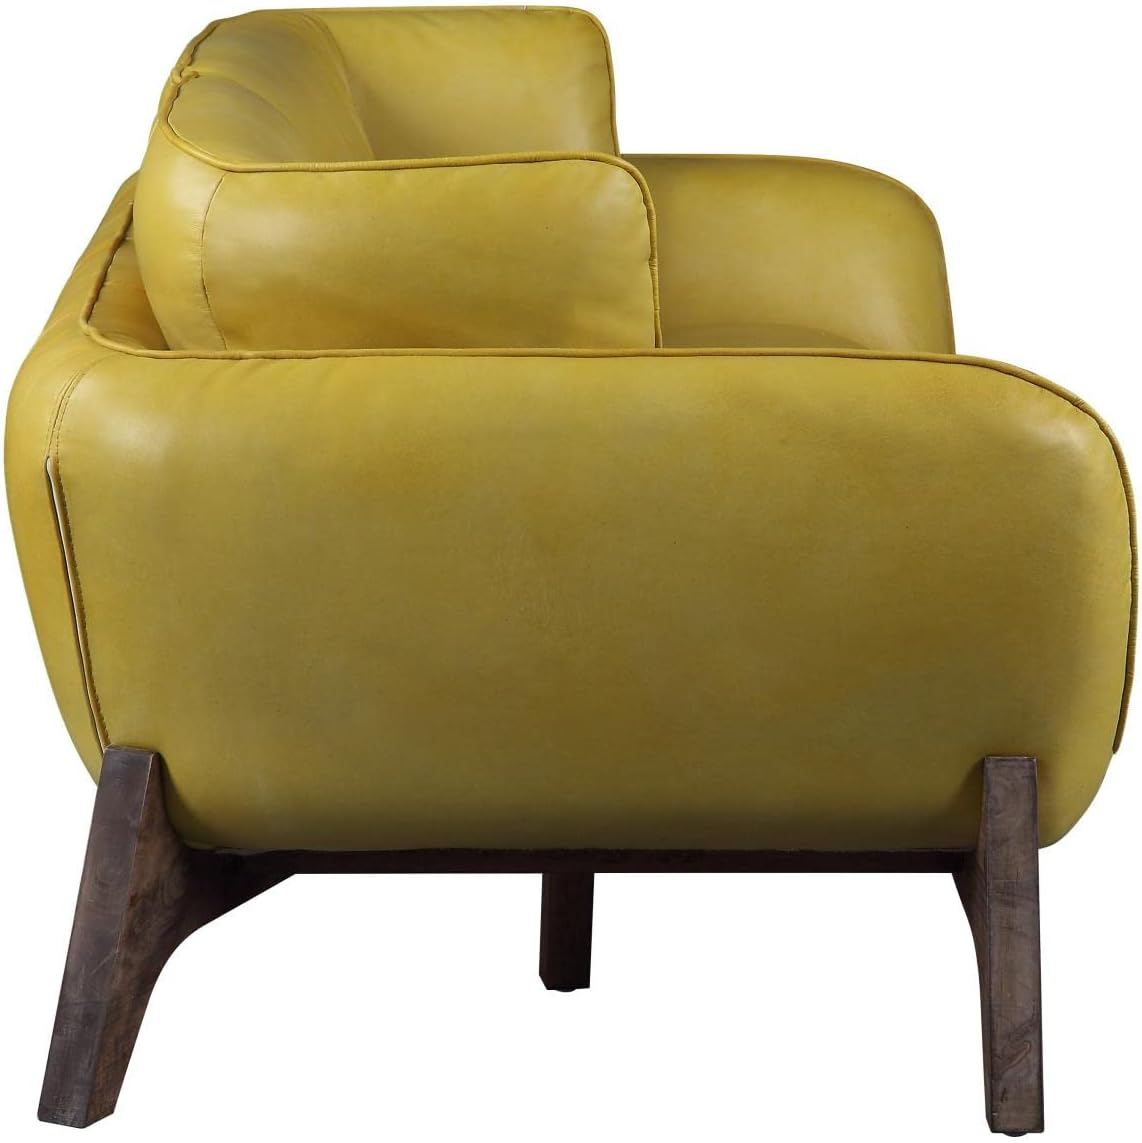 ACME Furniture Pesach Sofas, Mustard Leather - $1500